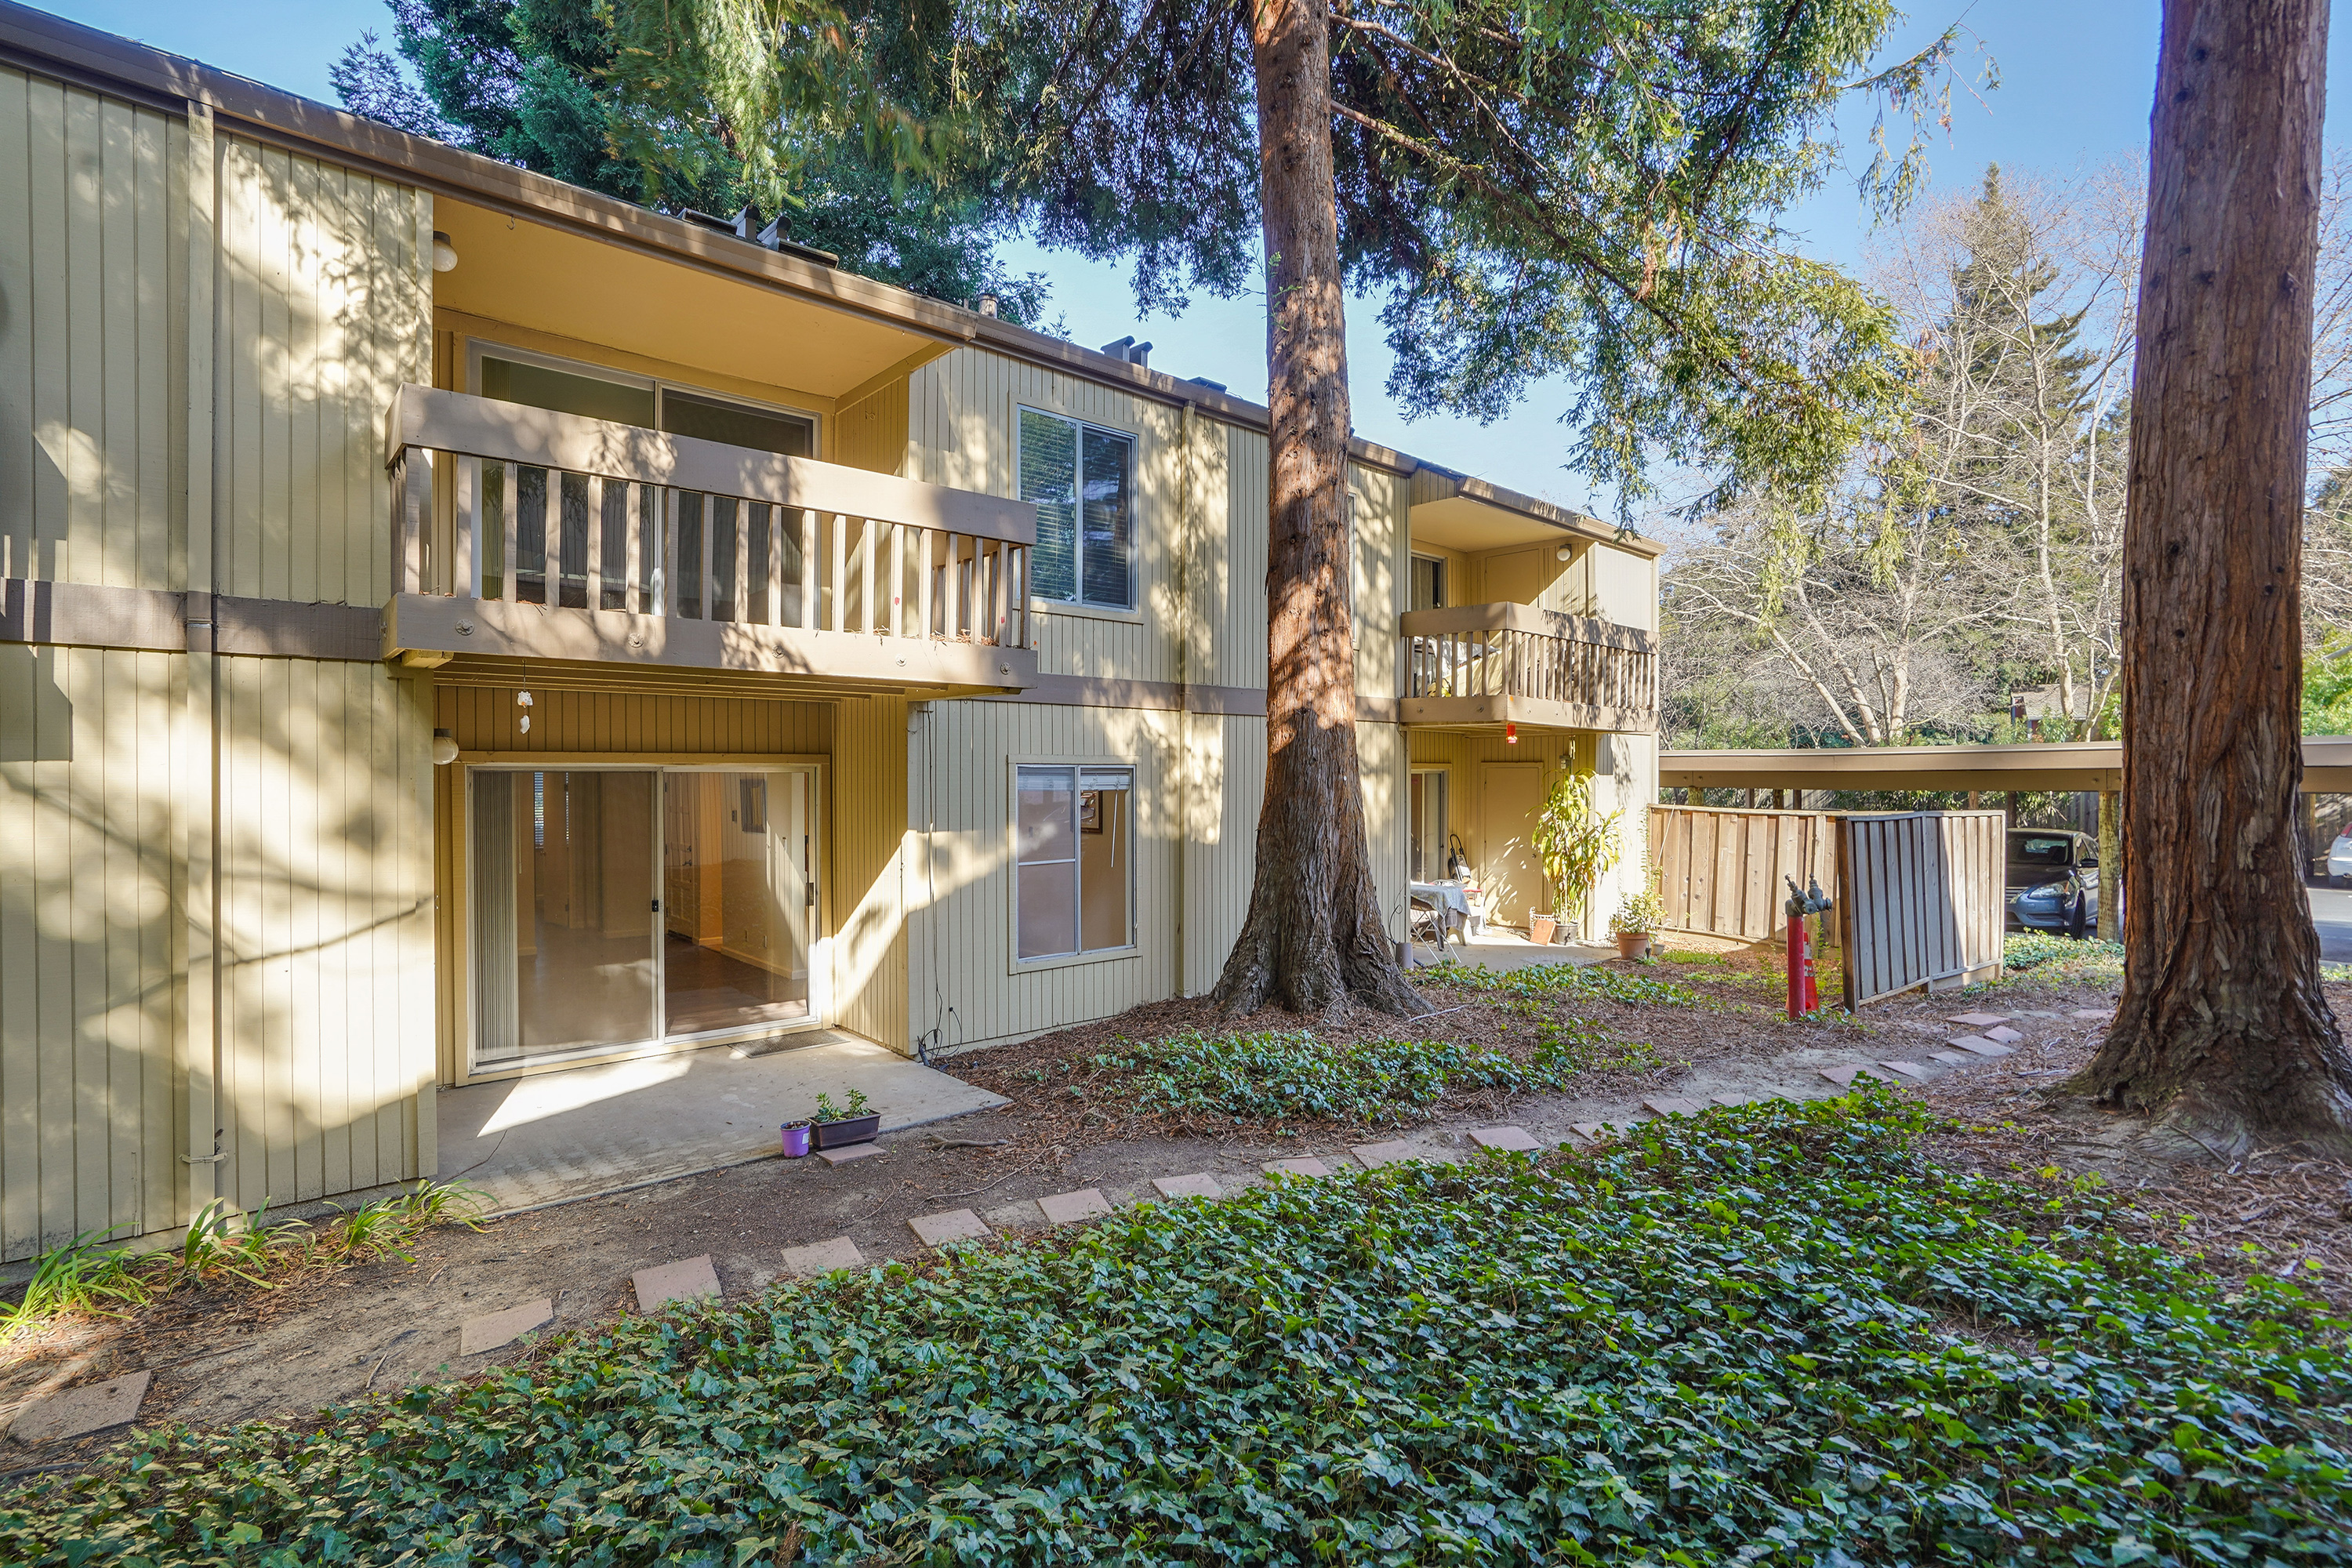 505 Cypress Point Dr #45, Mountain View 94043 - Cypress Point Dr 505 45 